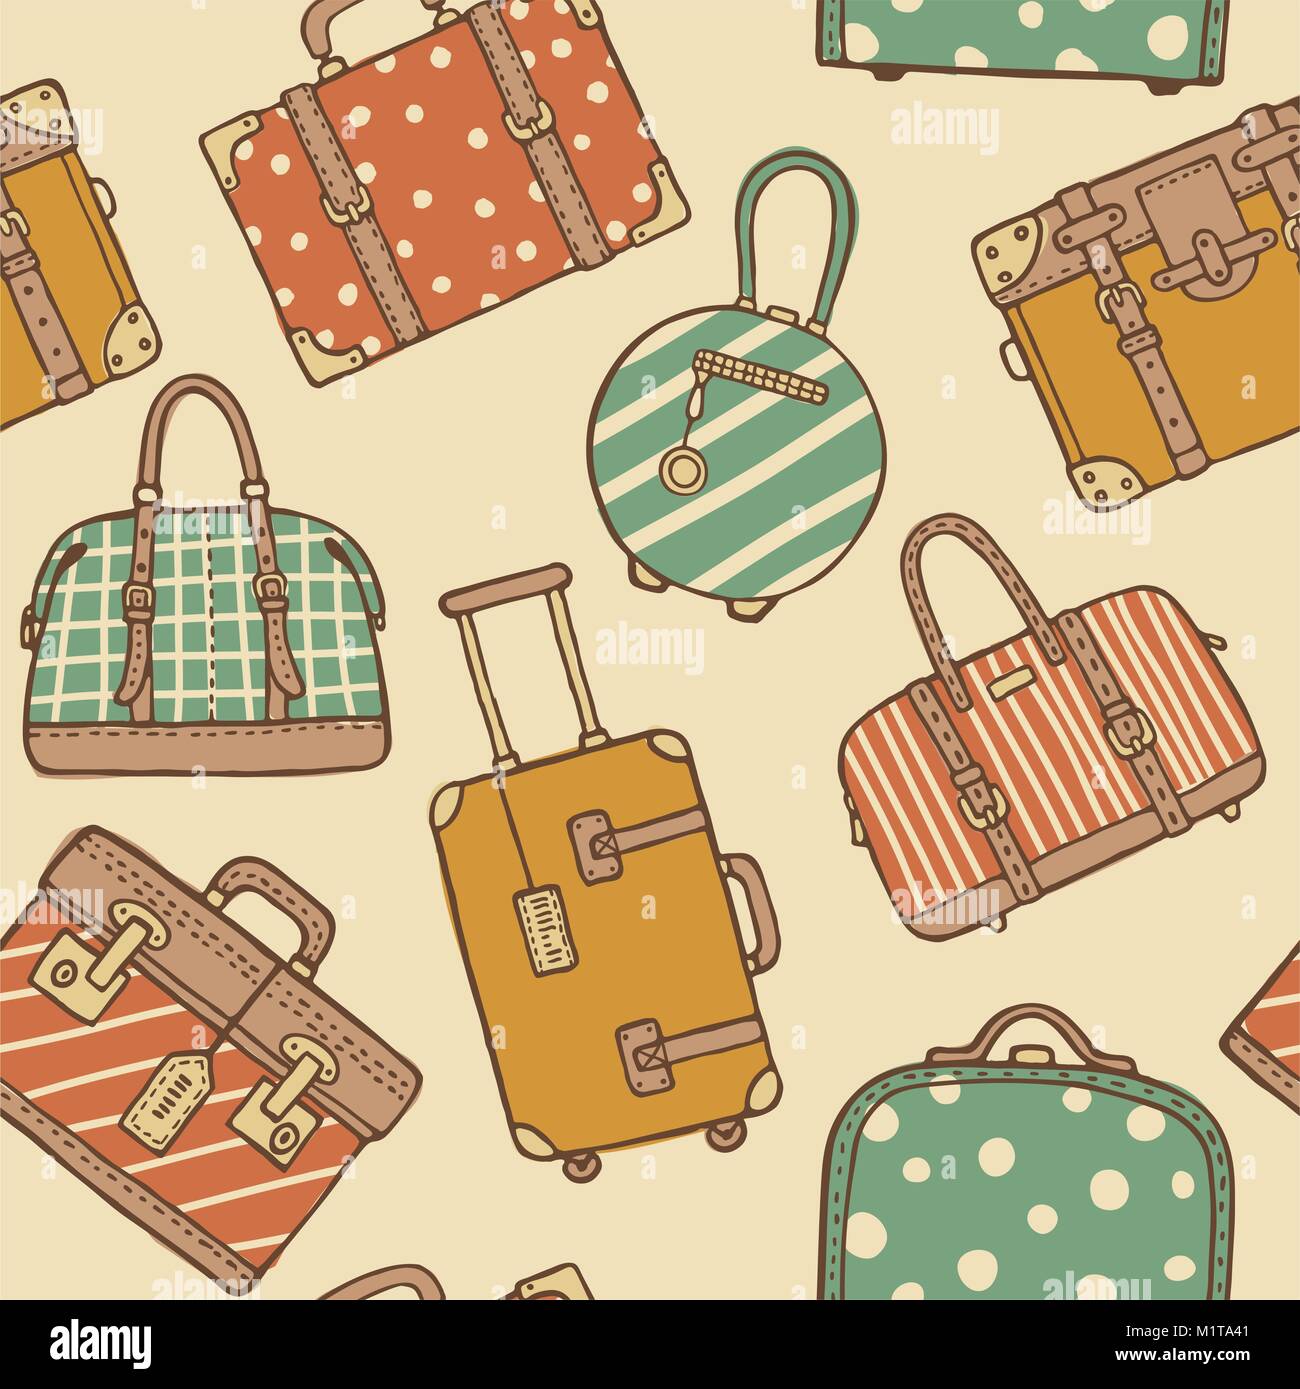 Vector hand drawn sketch style seamless pattern of vintage travel suitcases and bags for packing. Retro pastel colored doodles Stock Vector